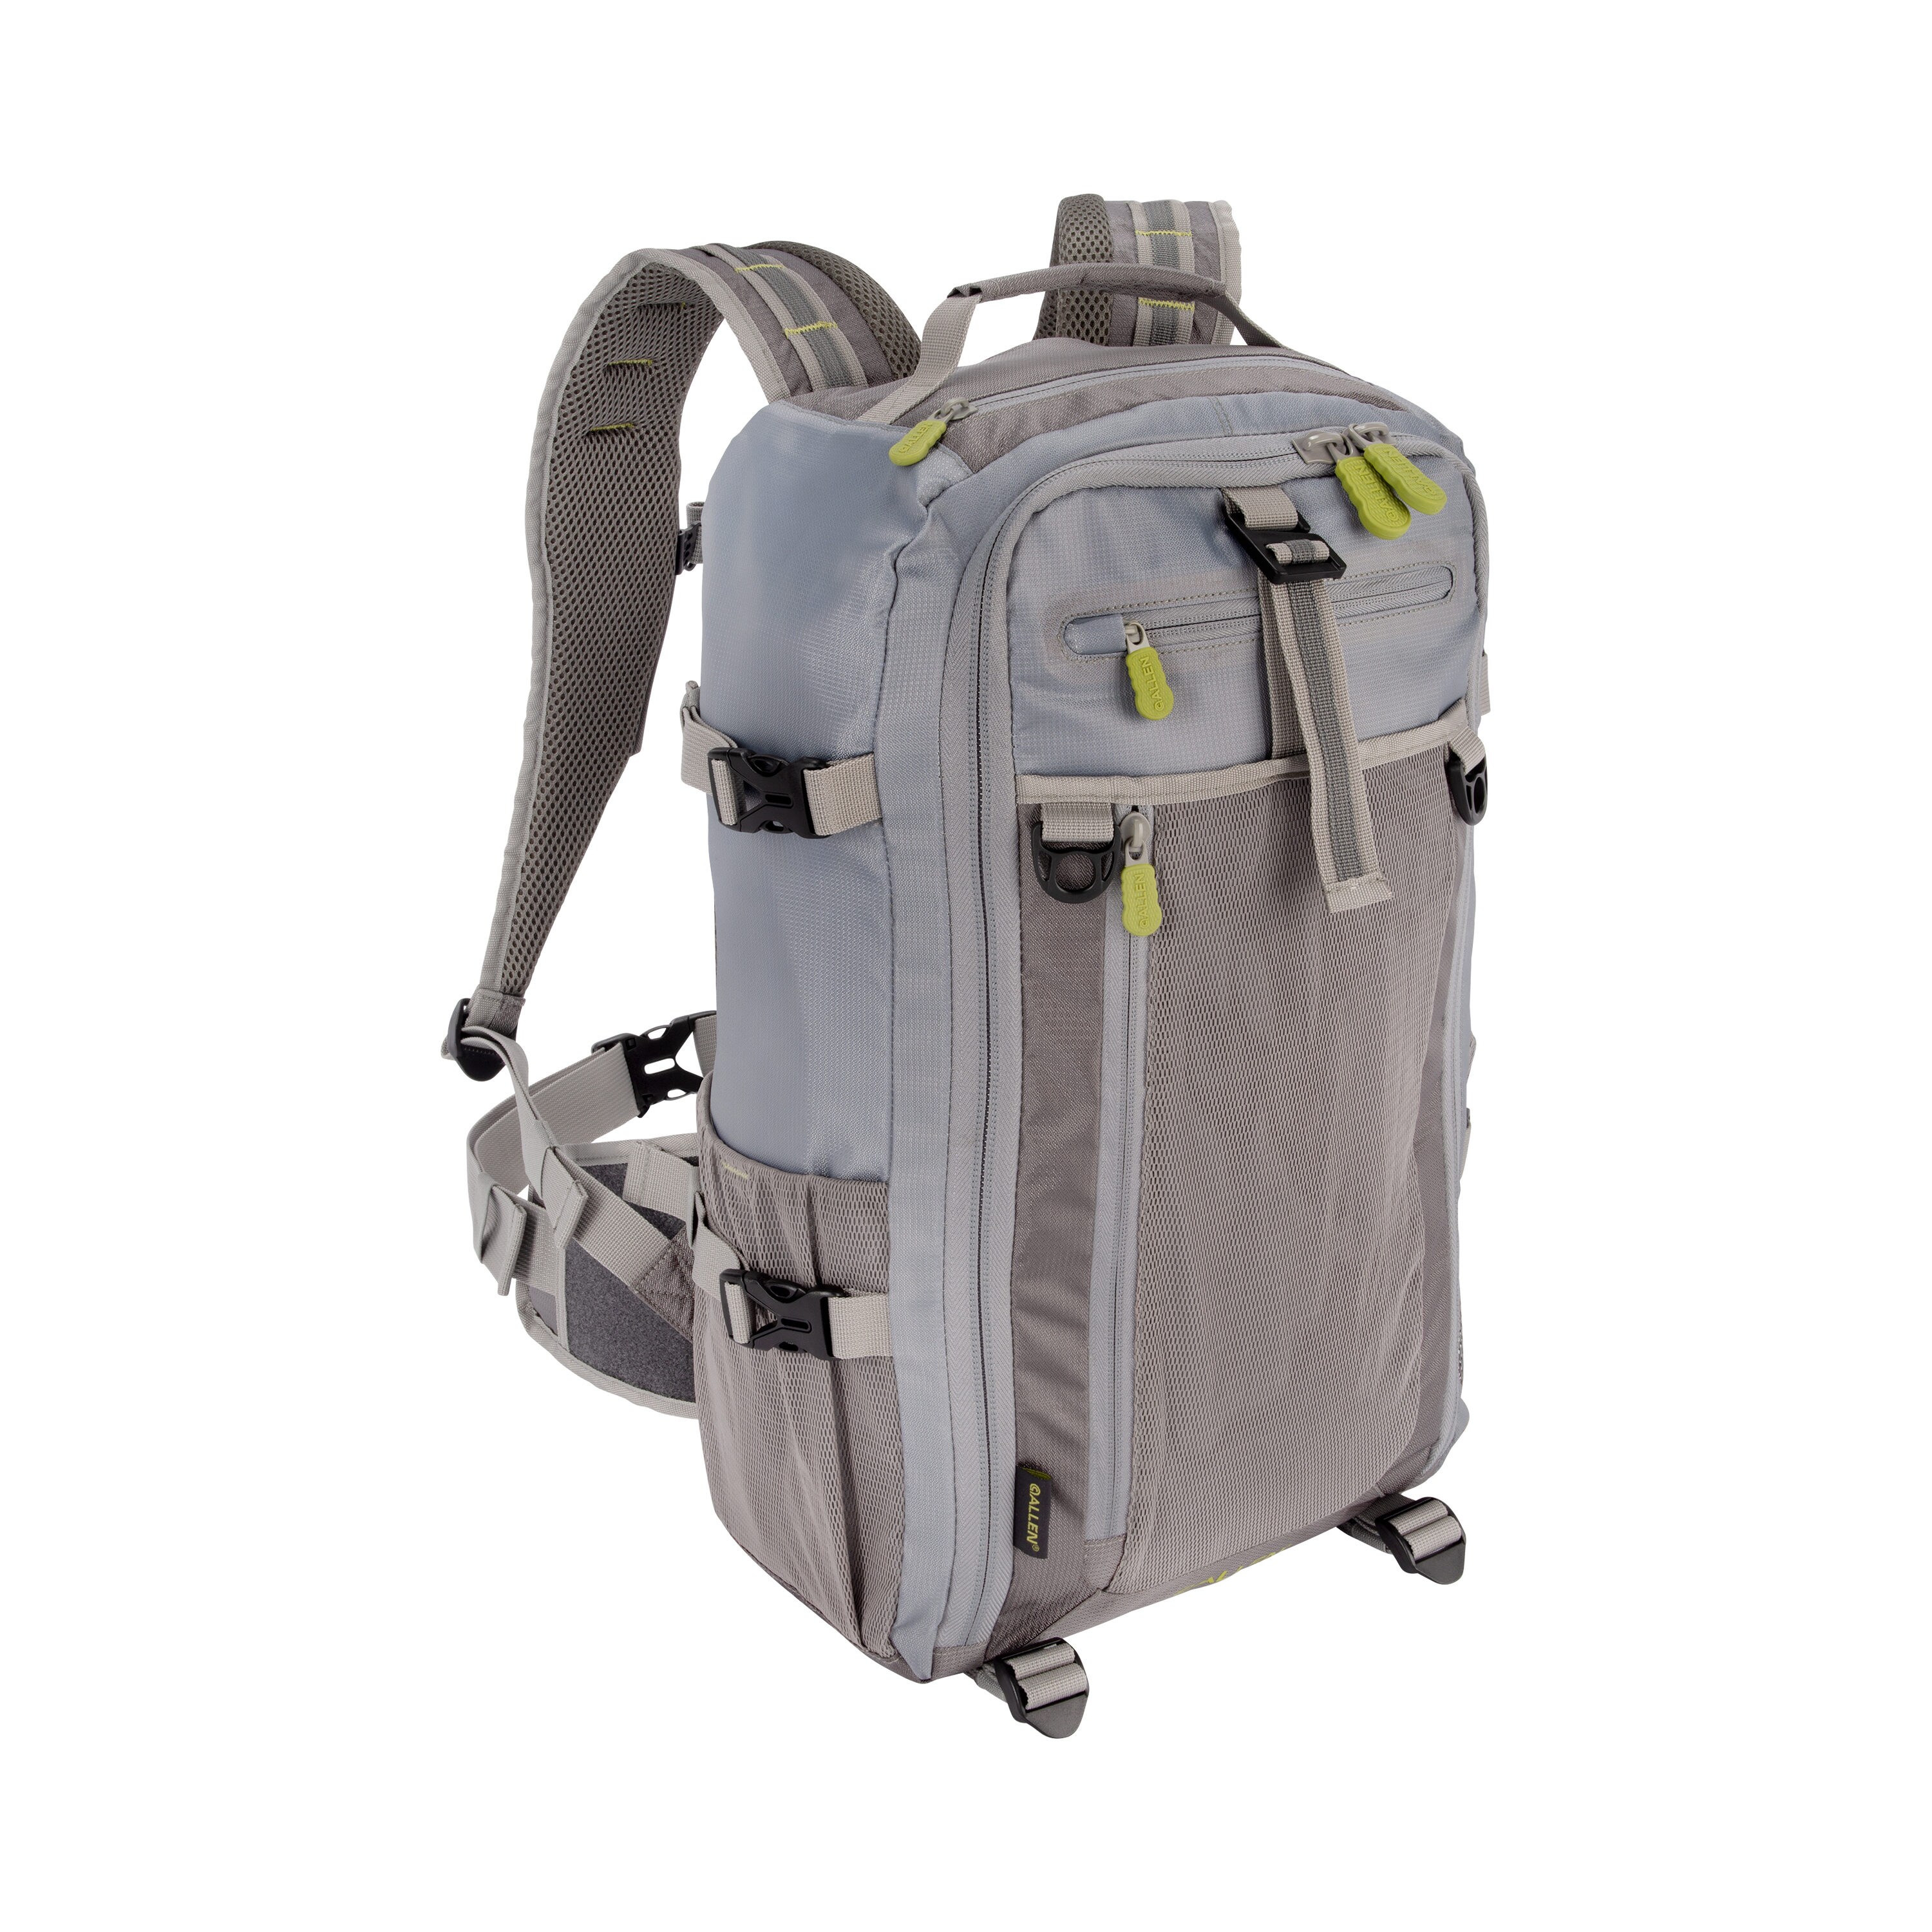 Bear Creek Micro Fly Fishing Chest Pack, Fits up to 2 Tackle and Fly Boxes,  Gray and Lime